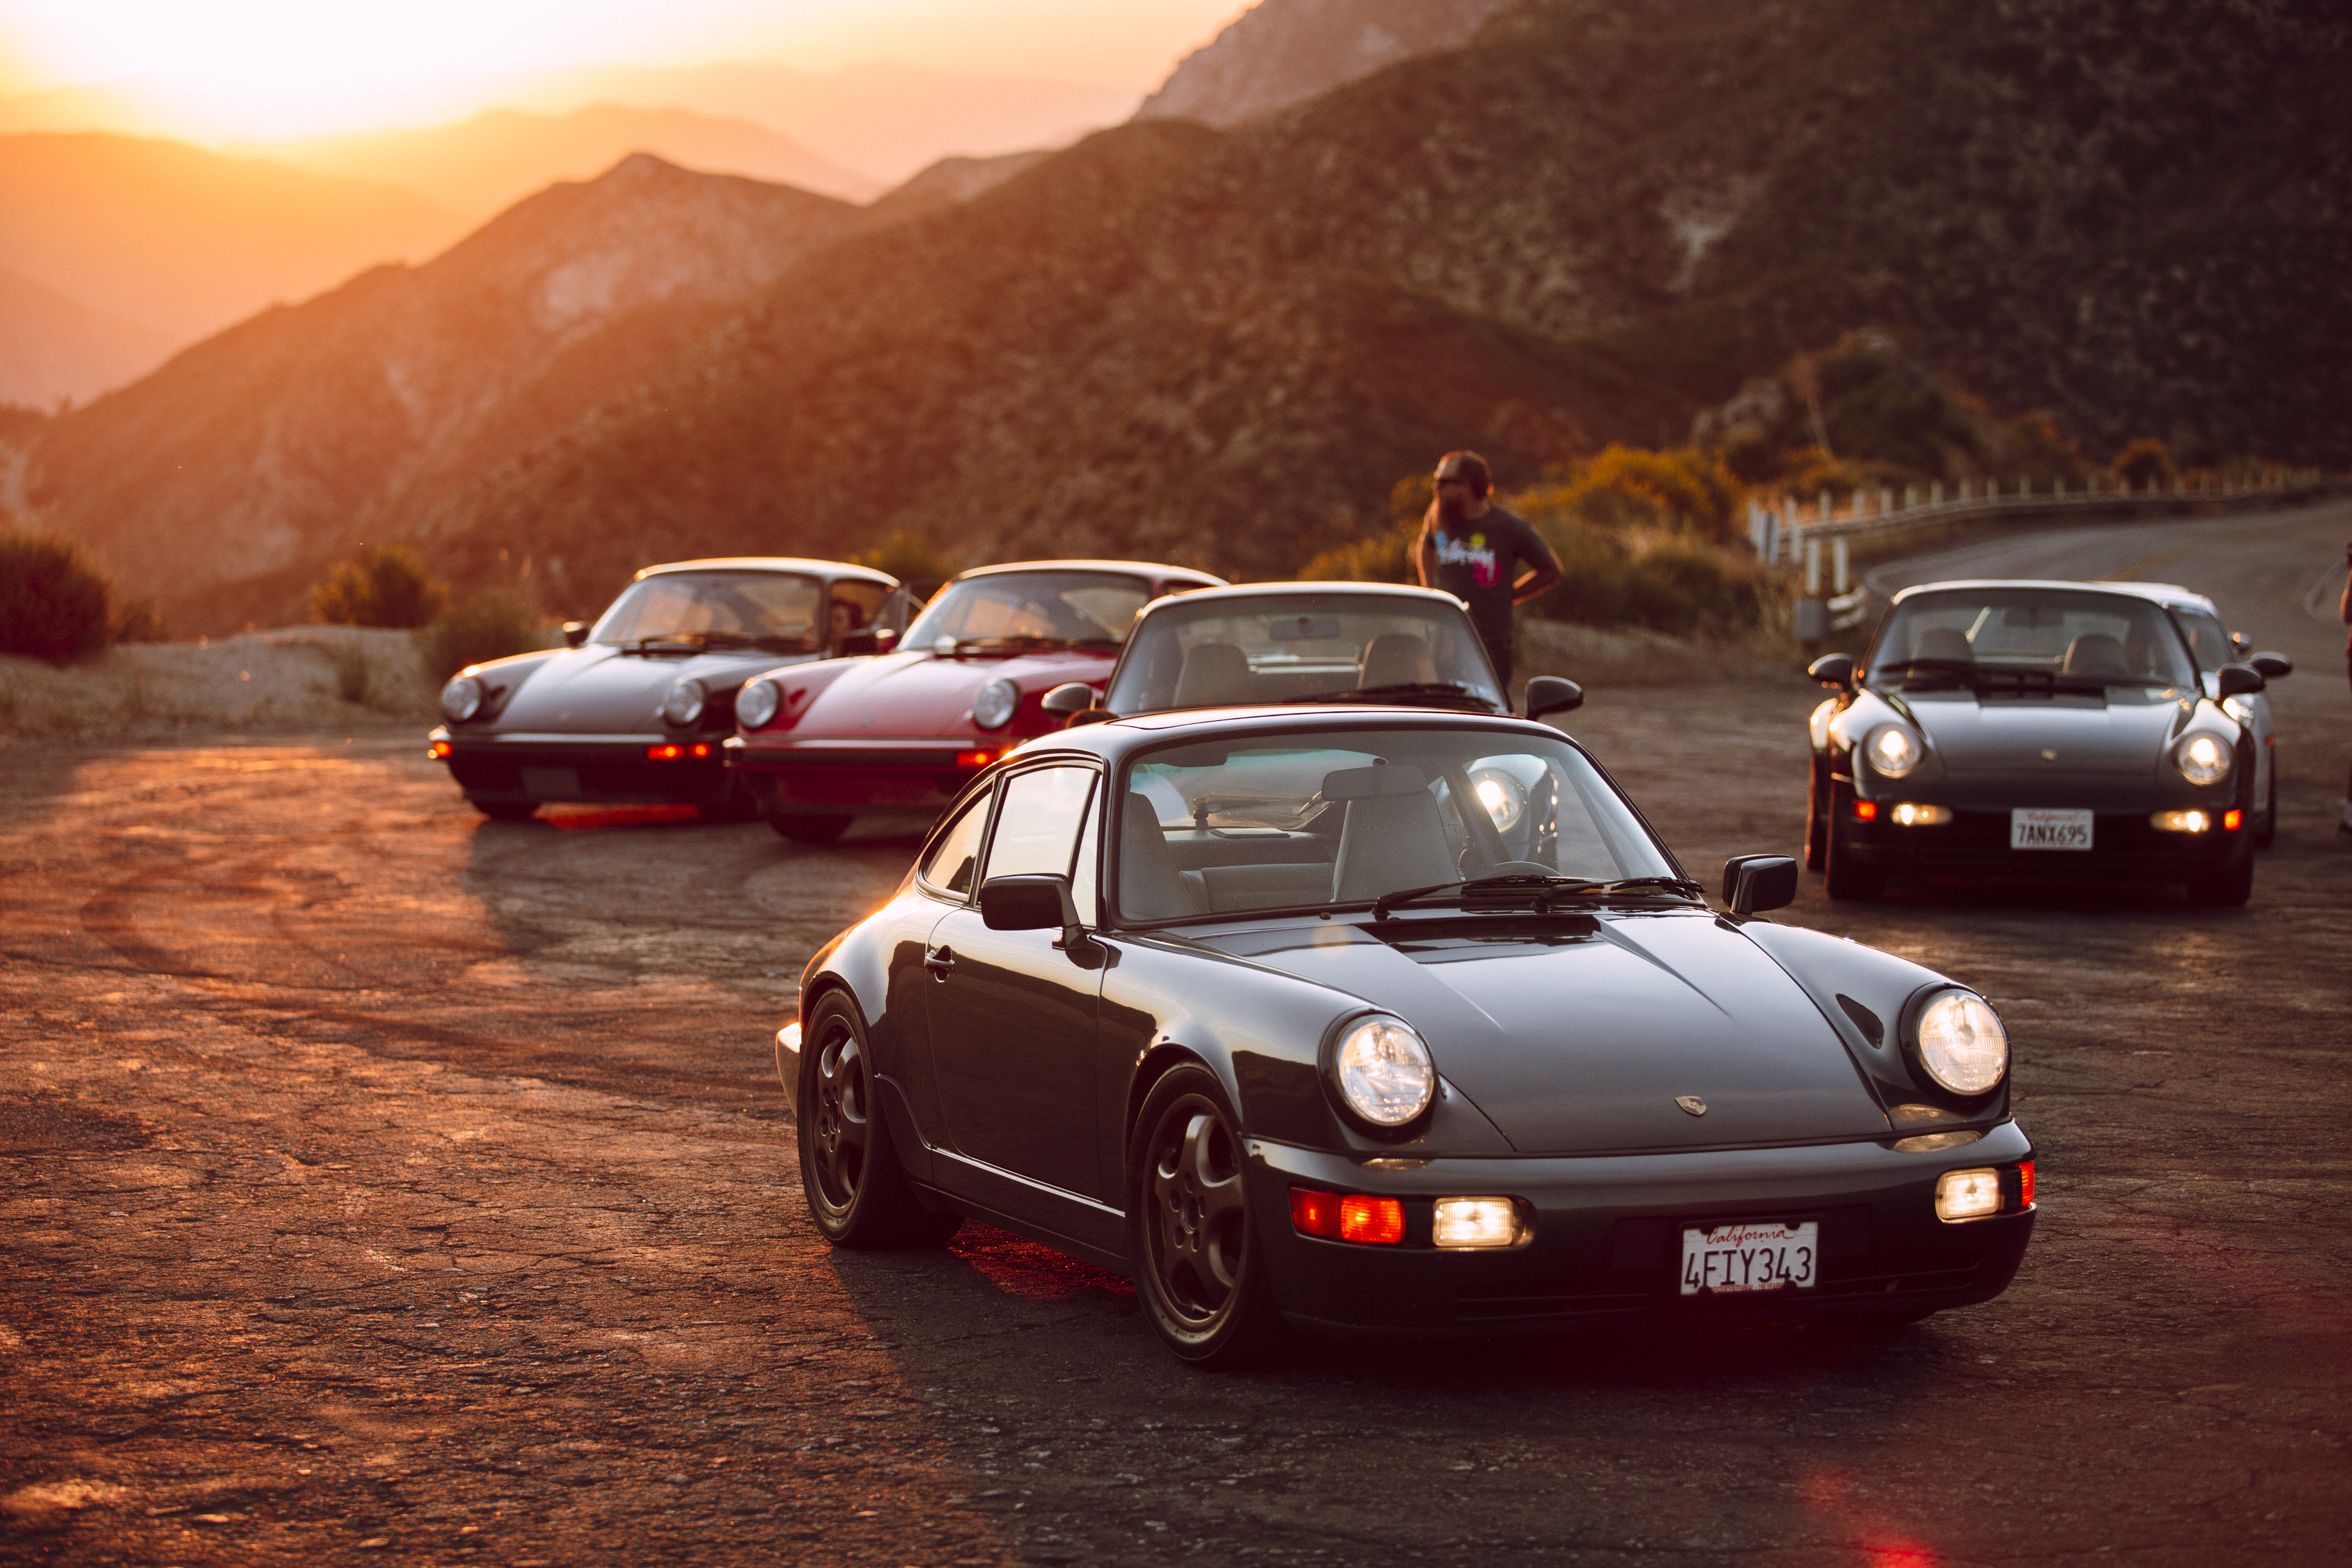 Collection of classic Porsche cars at sunset in California